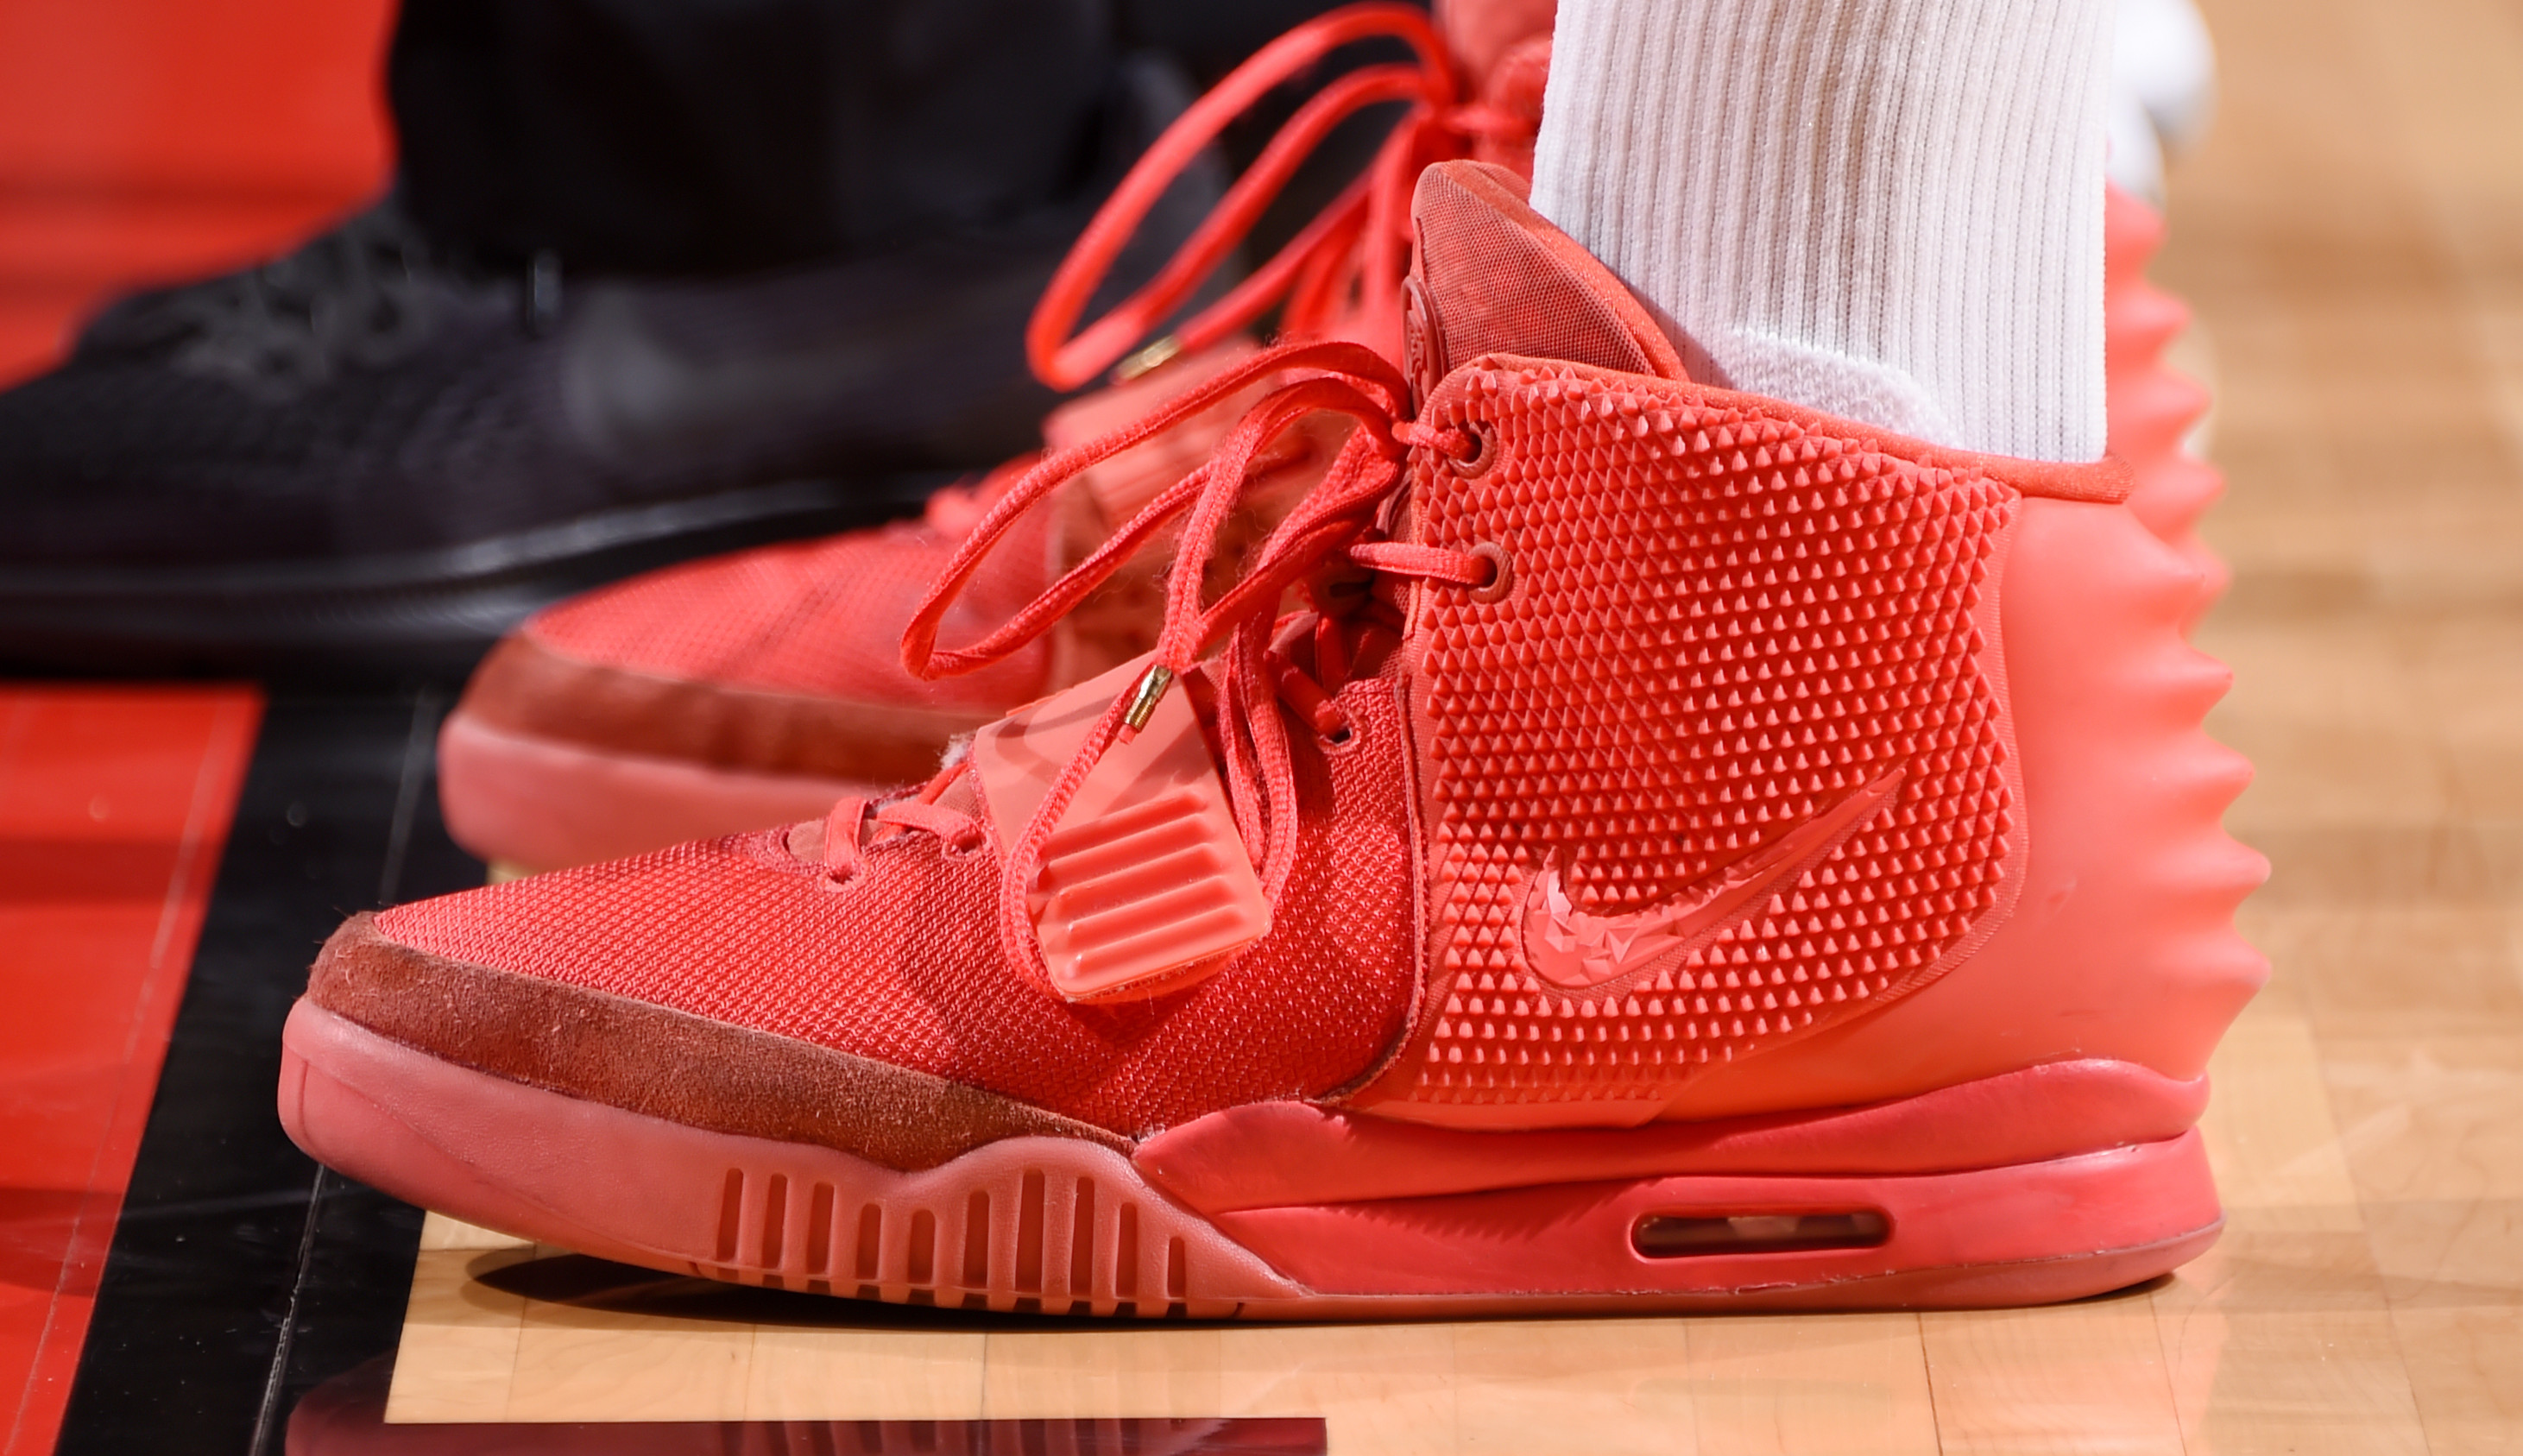 the nike air yeezy 2 red october